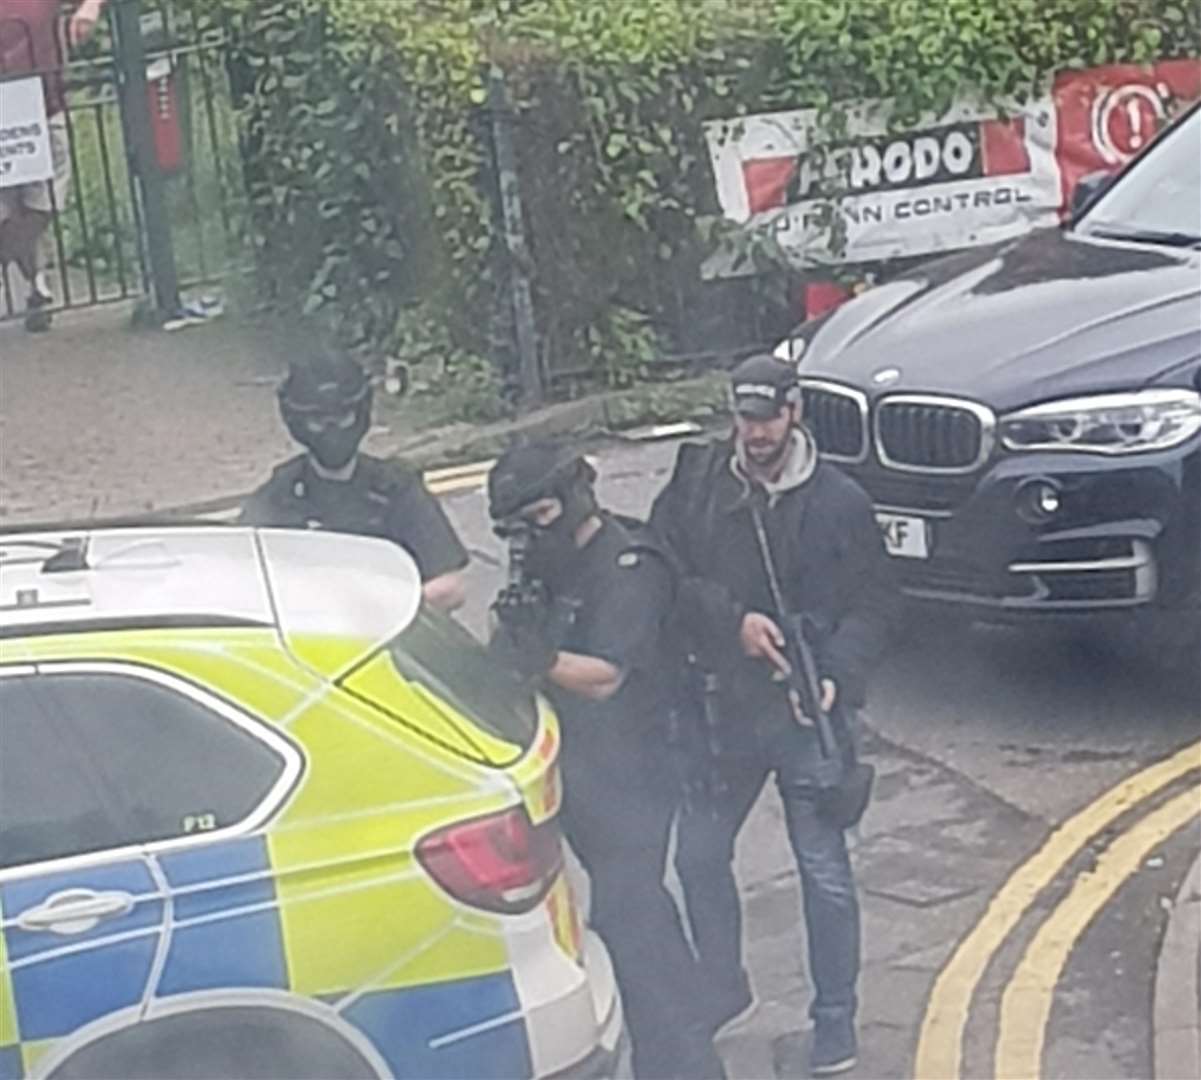 Armed police in Luton Road, Chatham (2270994)